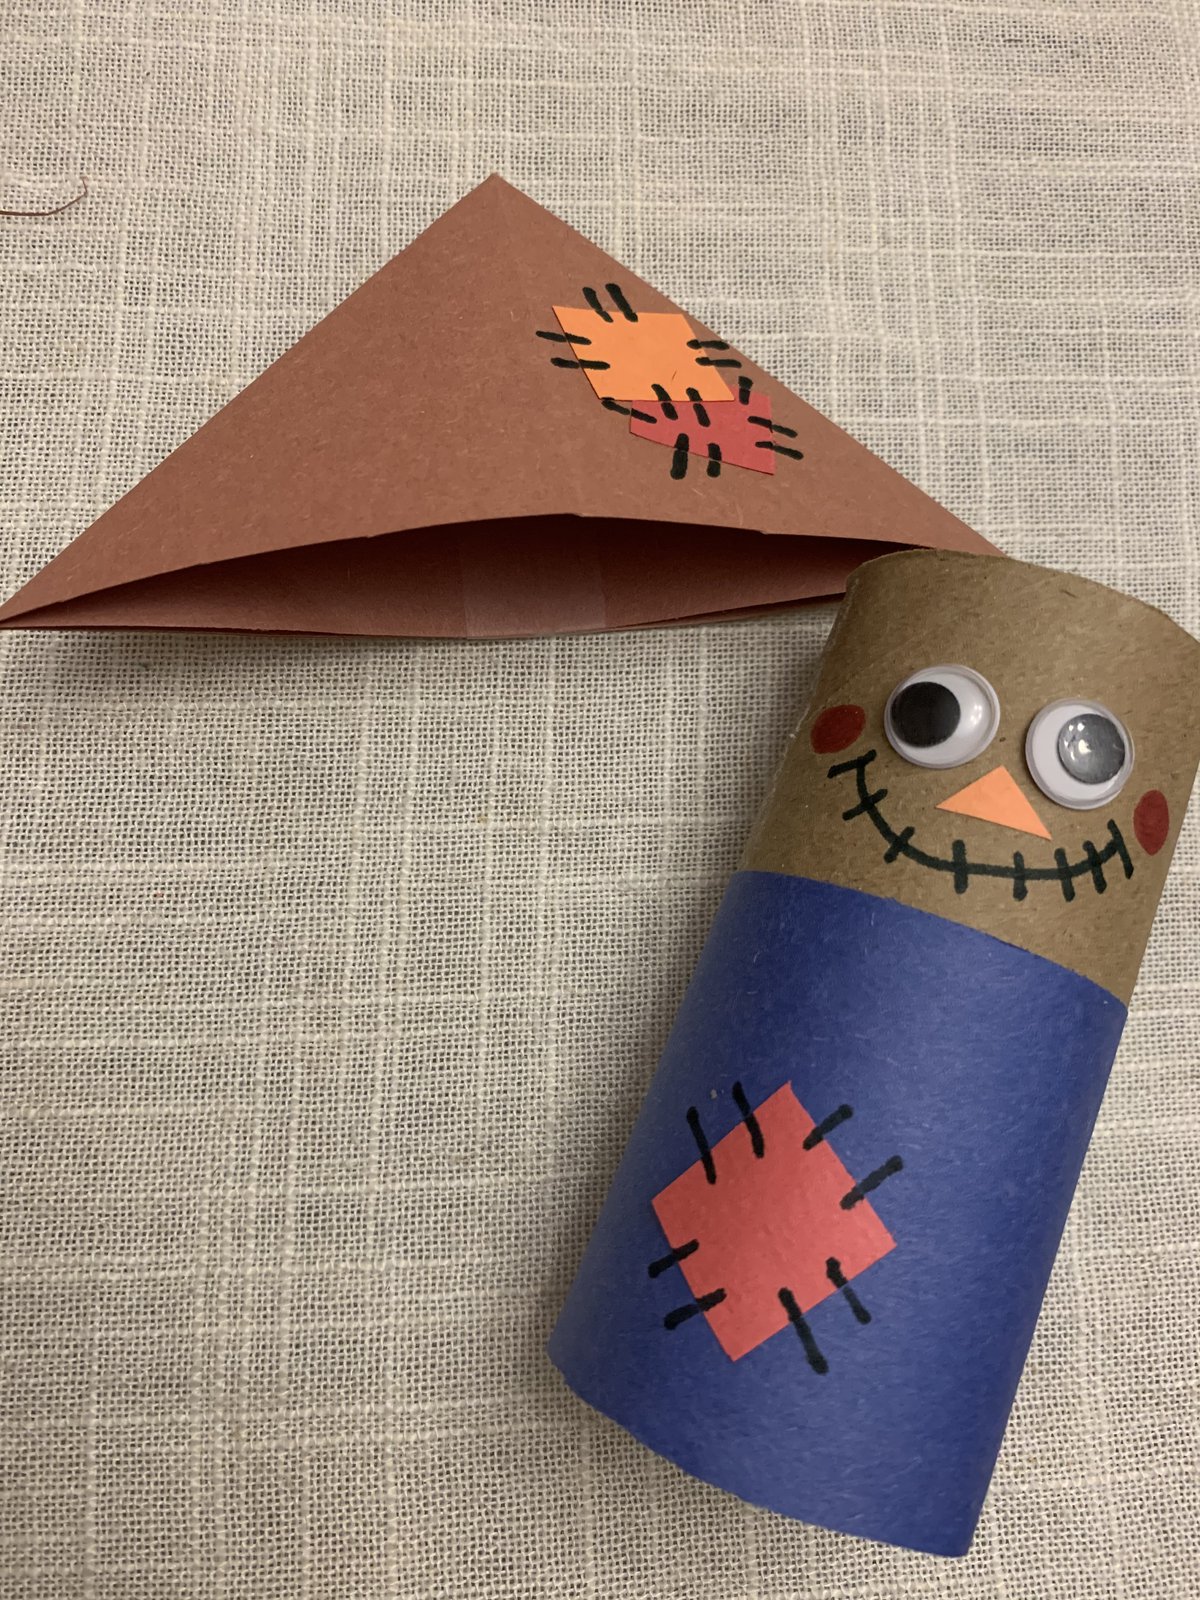 Toilet Paper Roll Scarecrow Craft - Pjs and Paint